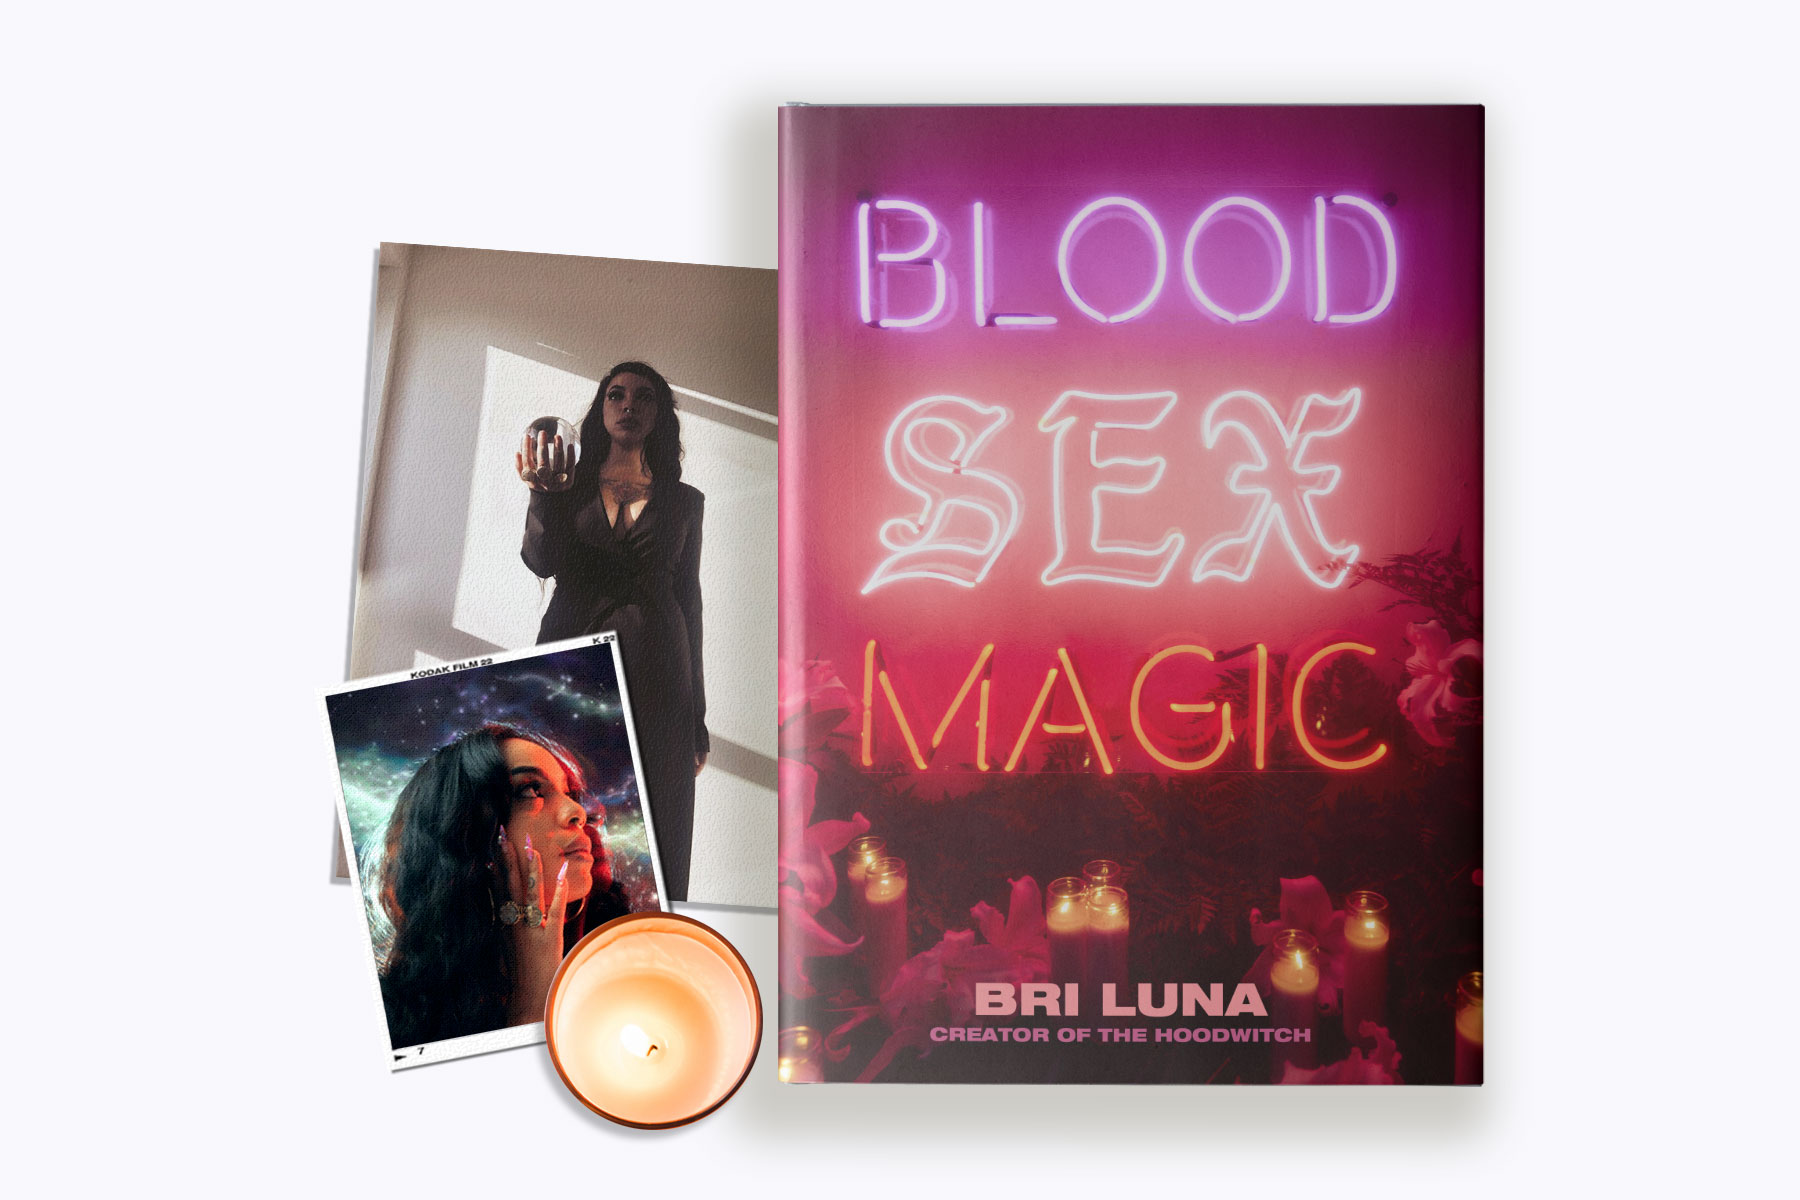 An photo illustration of Bri Luna's book, "Blood, Sex and Magic" along with images of her and a lit candle.